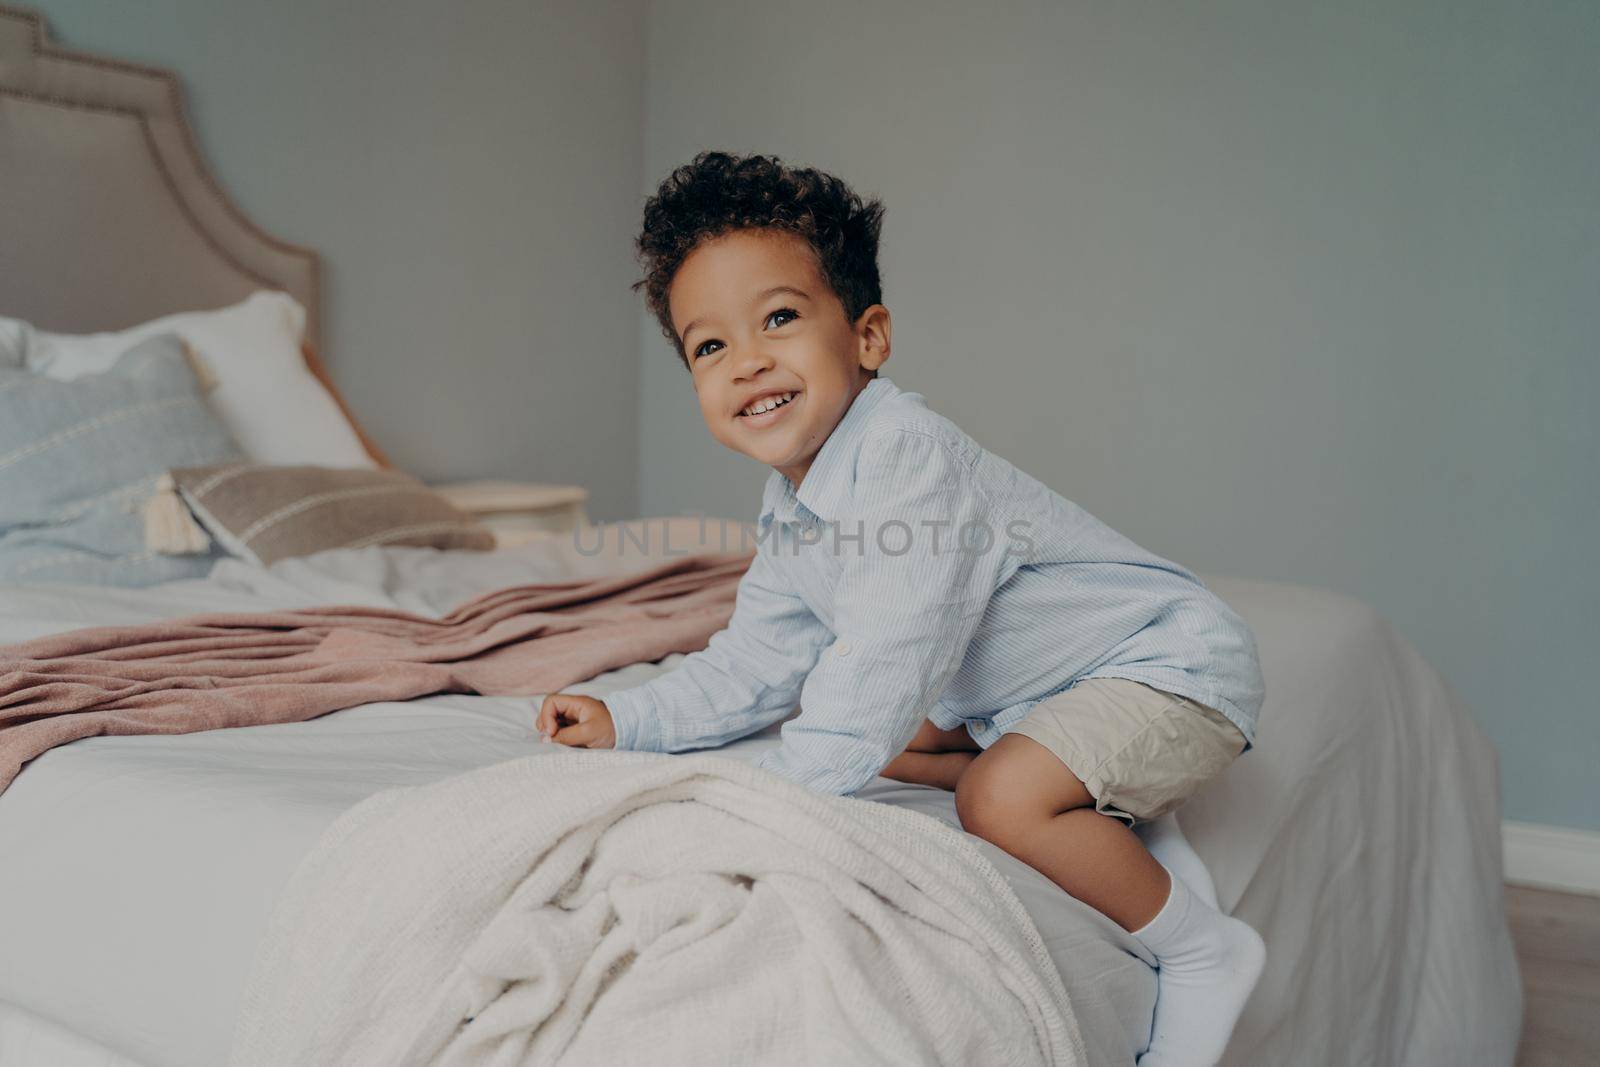 Cute happy african american kid boy playing and having fun on bed after coming home from kindergarten, playing and smiling while spending time in bedroom. Carefree childhood concept